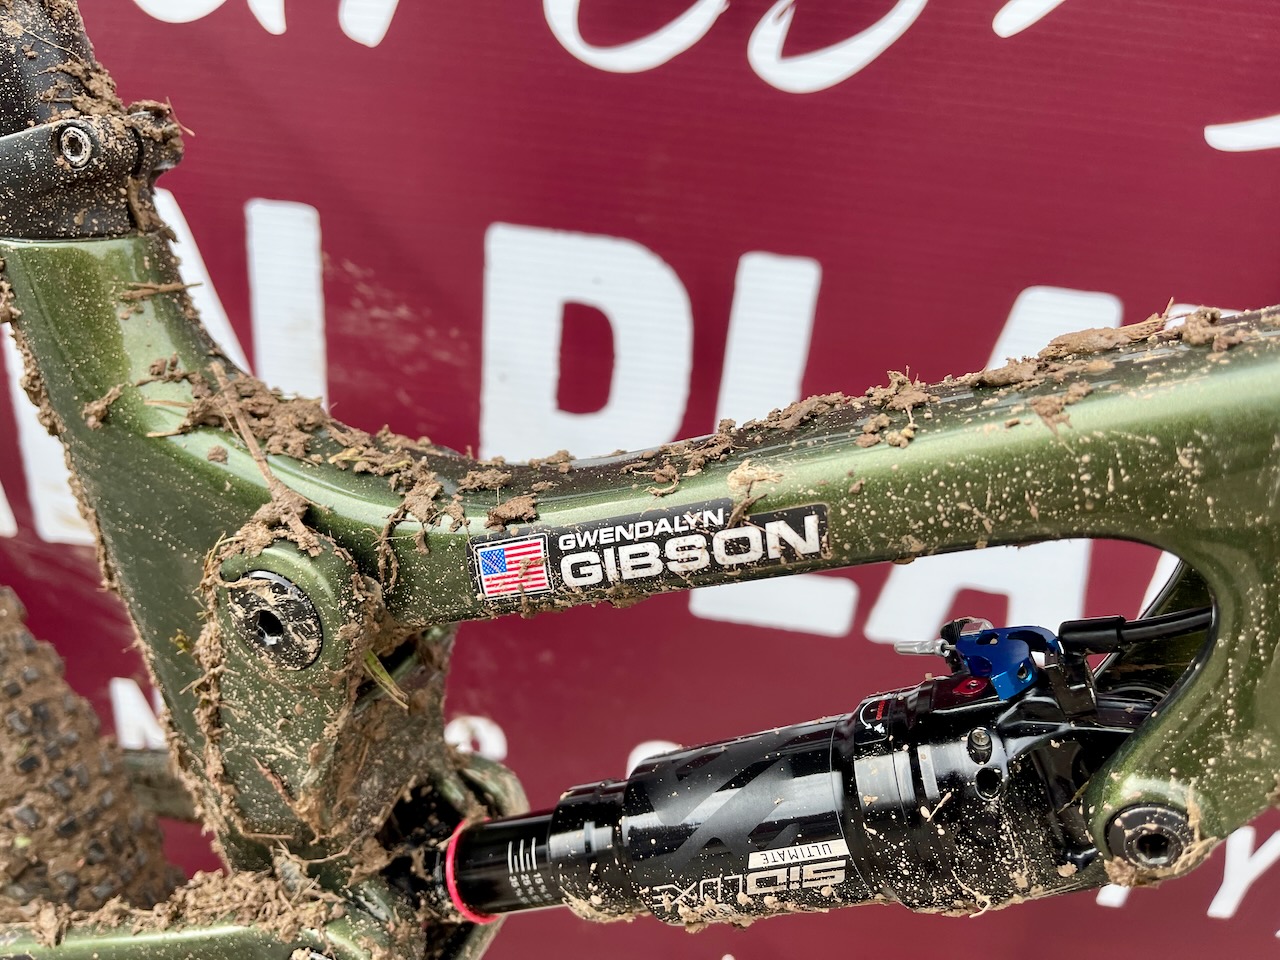 Gwendalyn Gibson Pro Bike Check Norco Revolver name